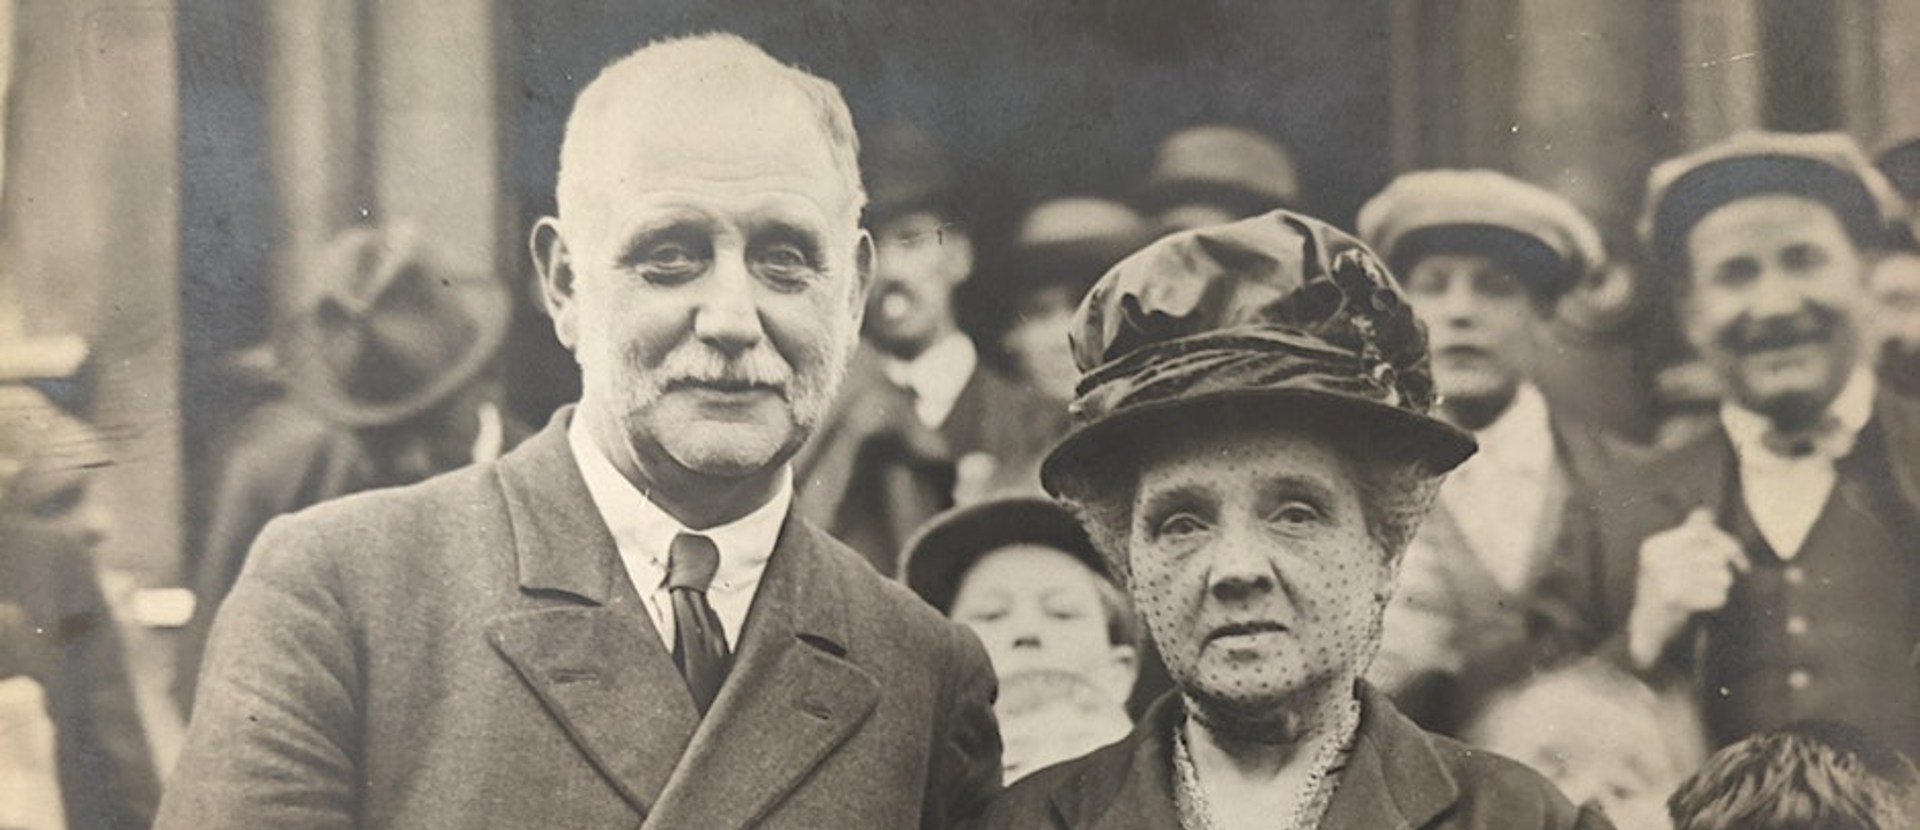 George Lansbury stood with his wife for a photograph. Behind them is a crowd of people.